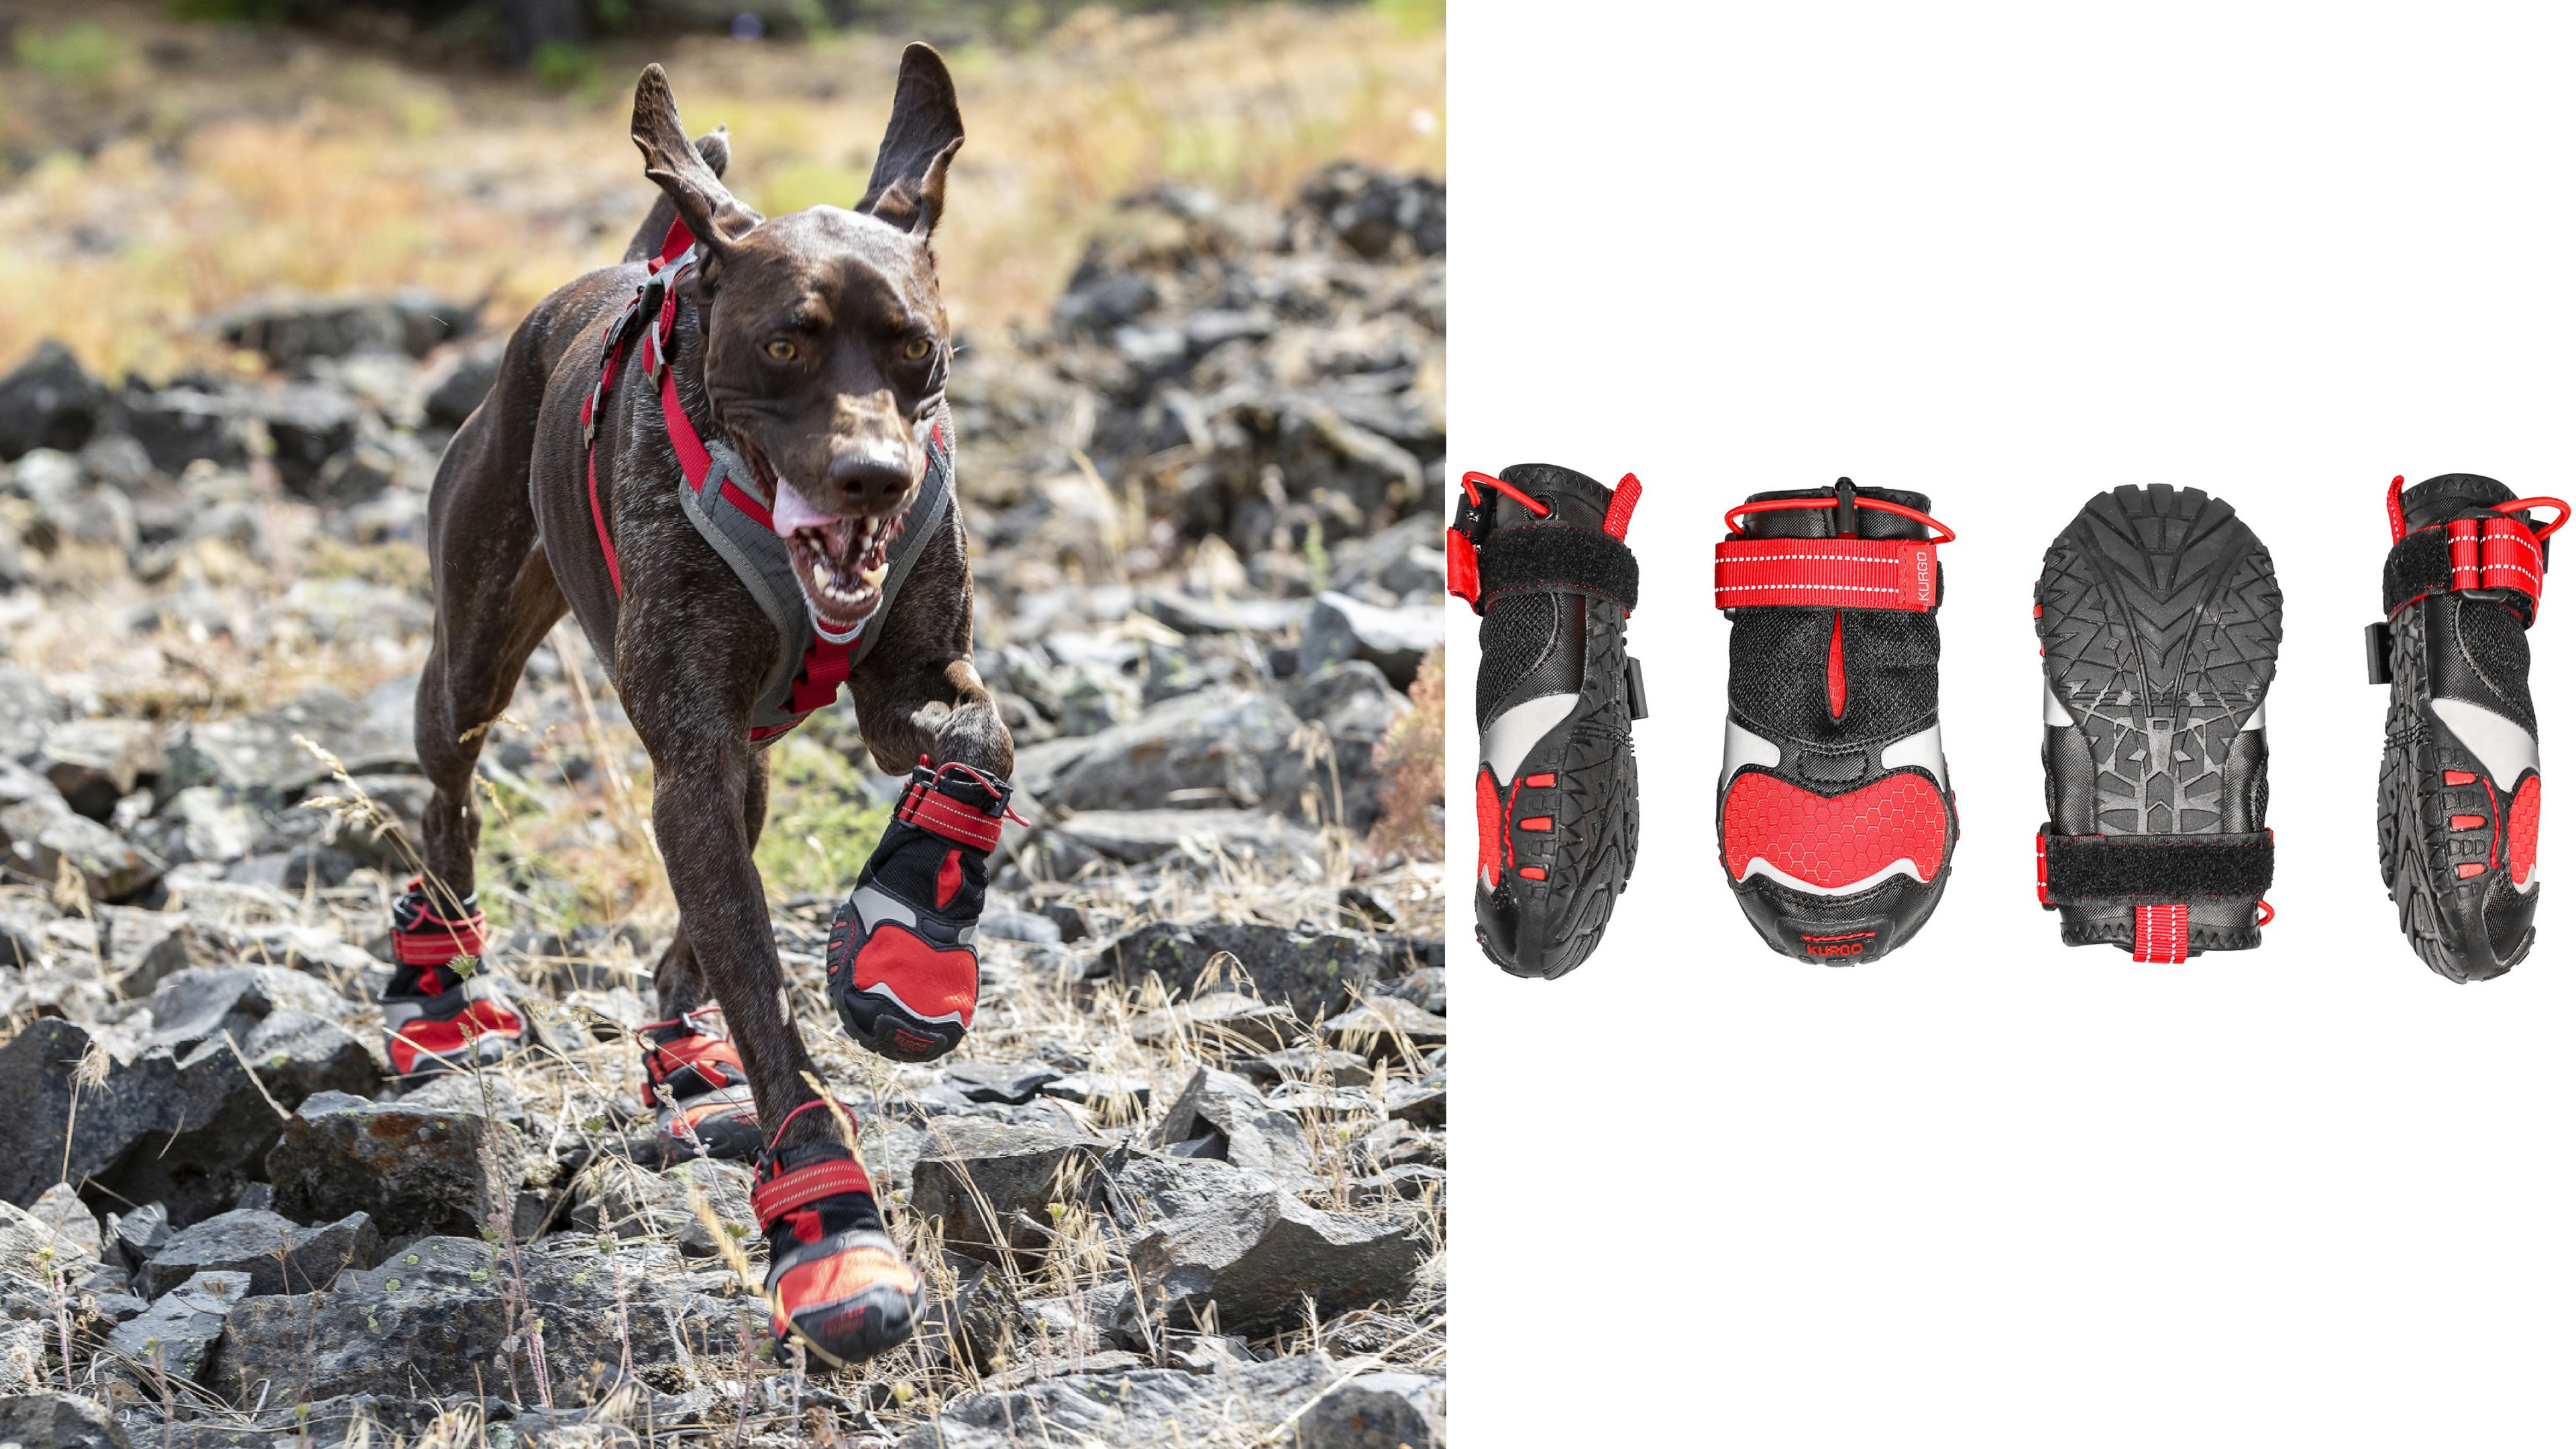 dog booties for off-terrain walking in snow, mud, and on rocks